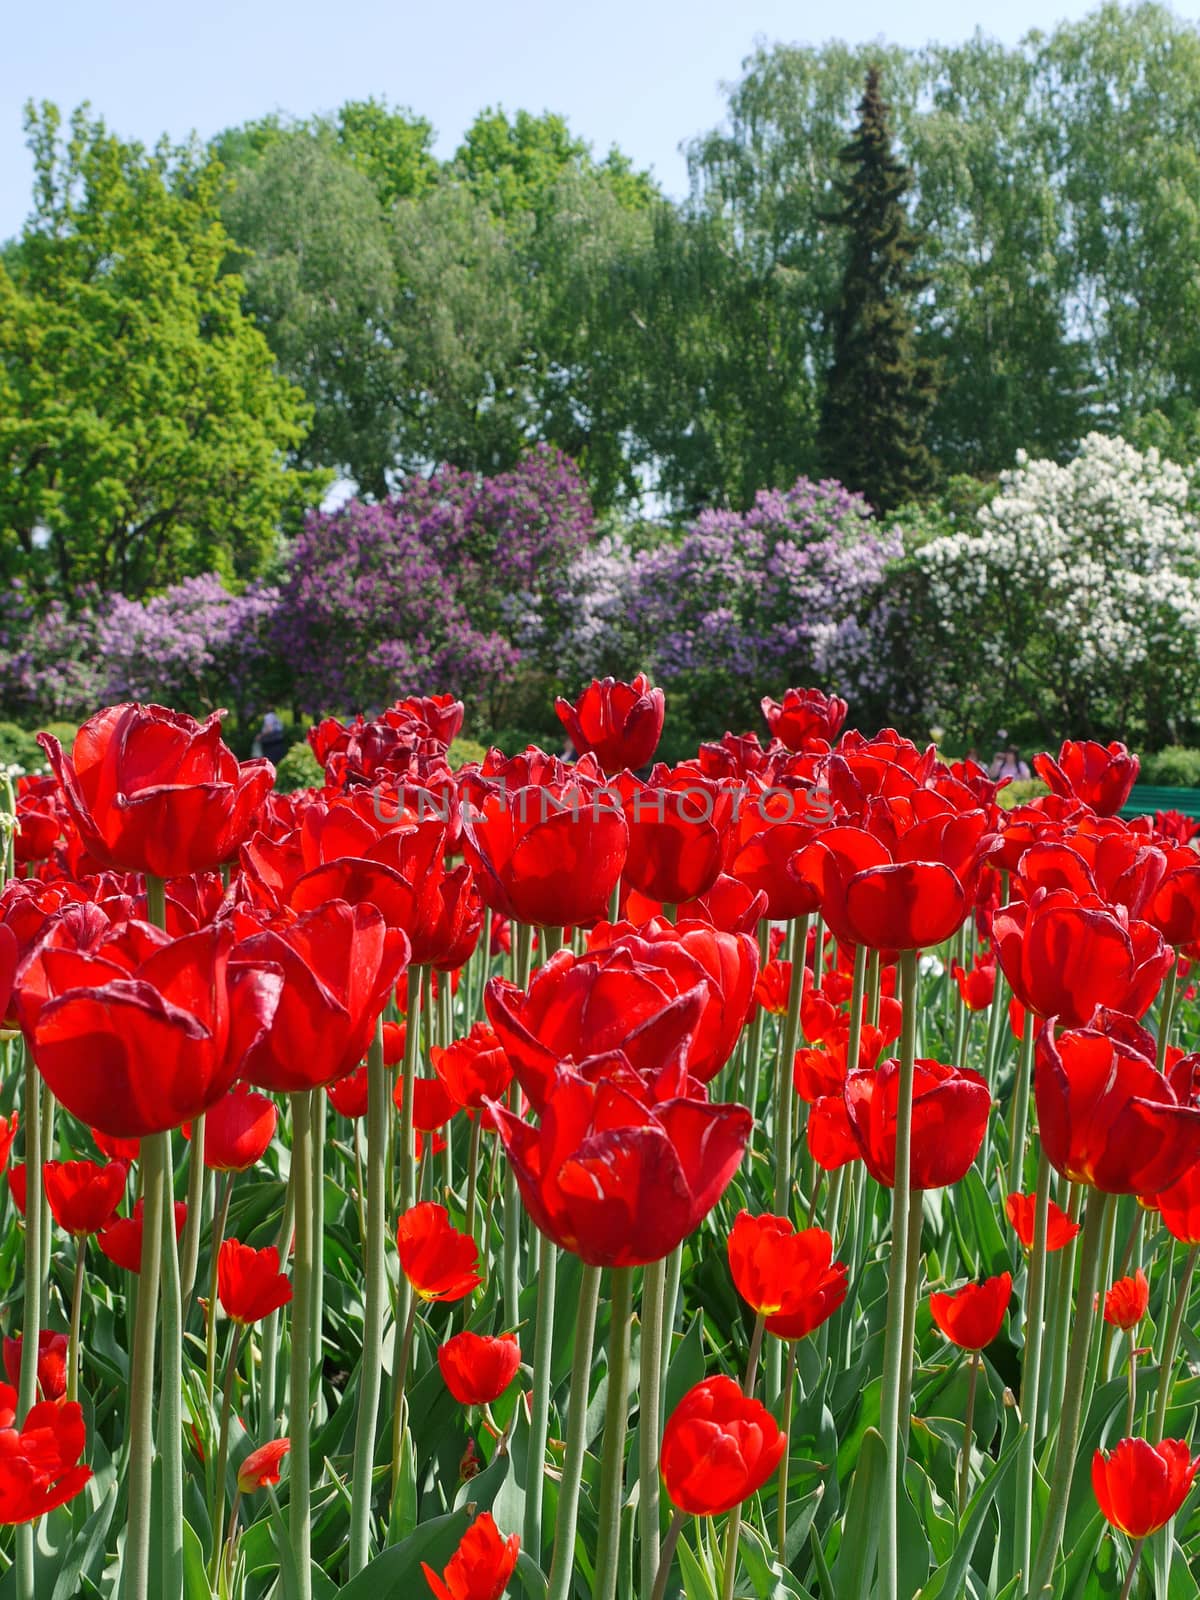 Flowers of red tulips with lilac bushes of different colors in the background by Adamchuk